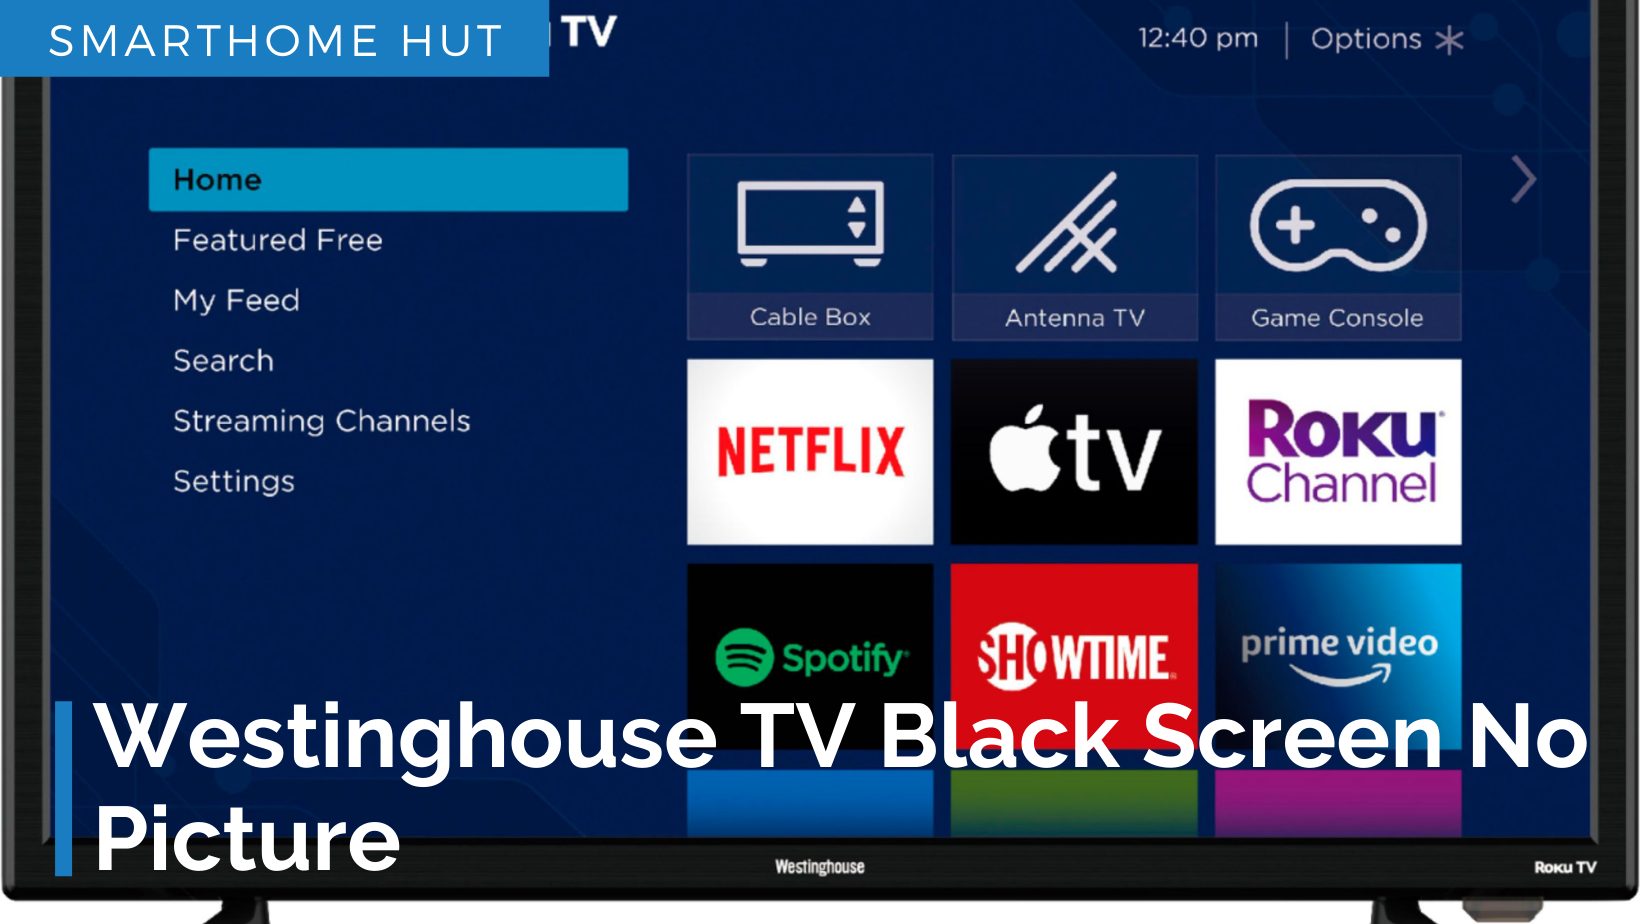 Westinghouse TV Black Screen No Picture